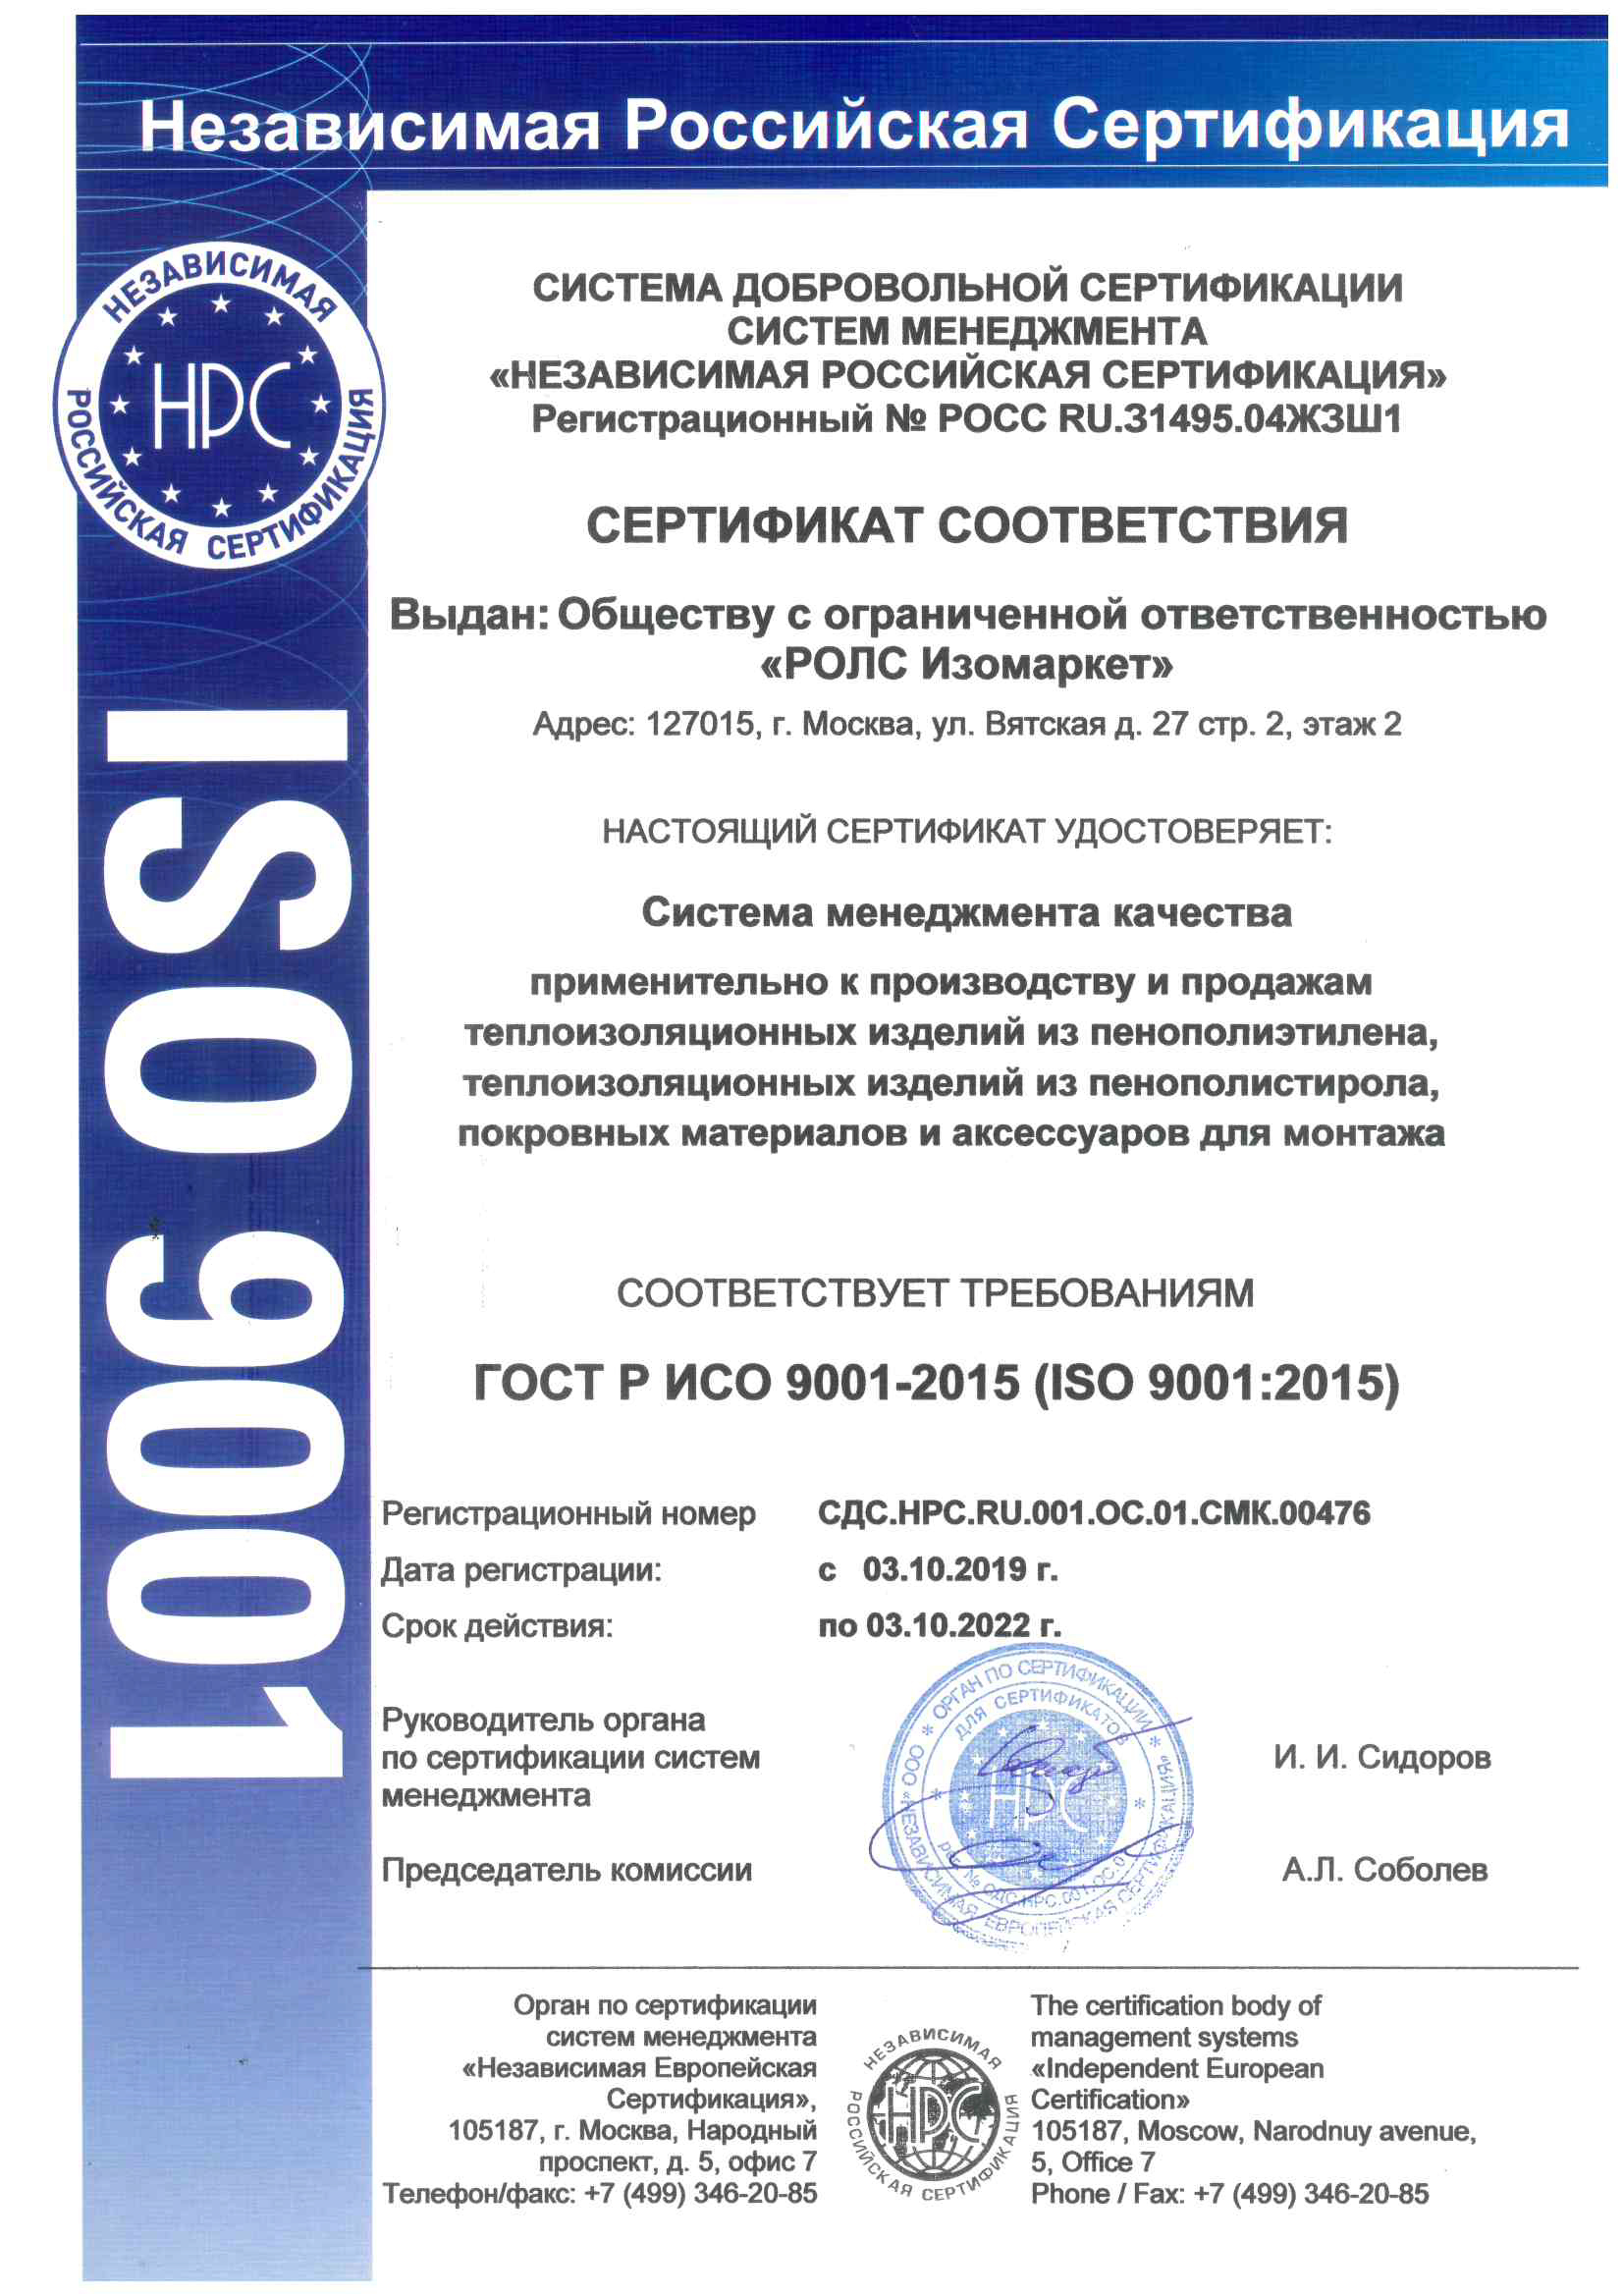 Our company is certified for compliance with the requirements of the quality management system according to GOST R ISO 9001:2015